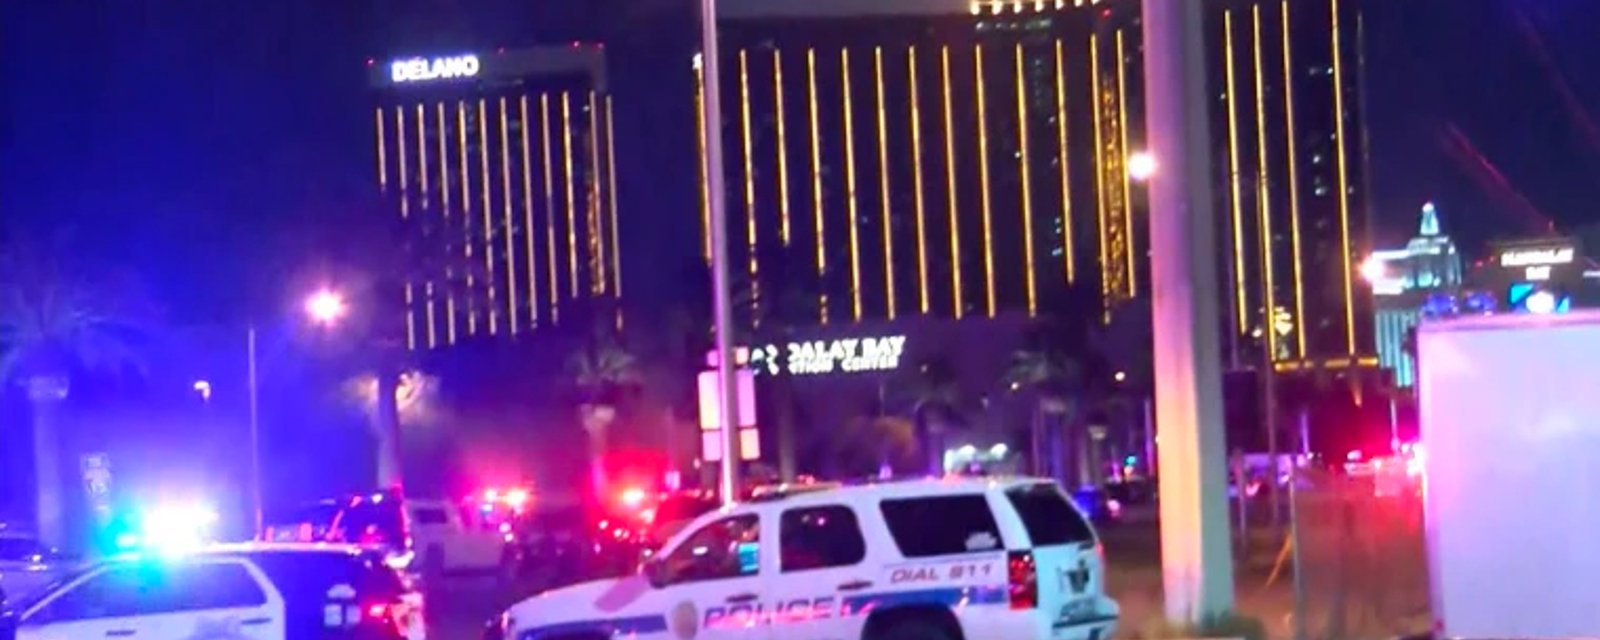 Vegas police foil alleged mass shooting threat just before Stanley Cup final